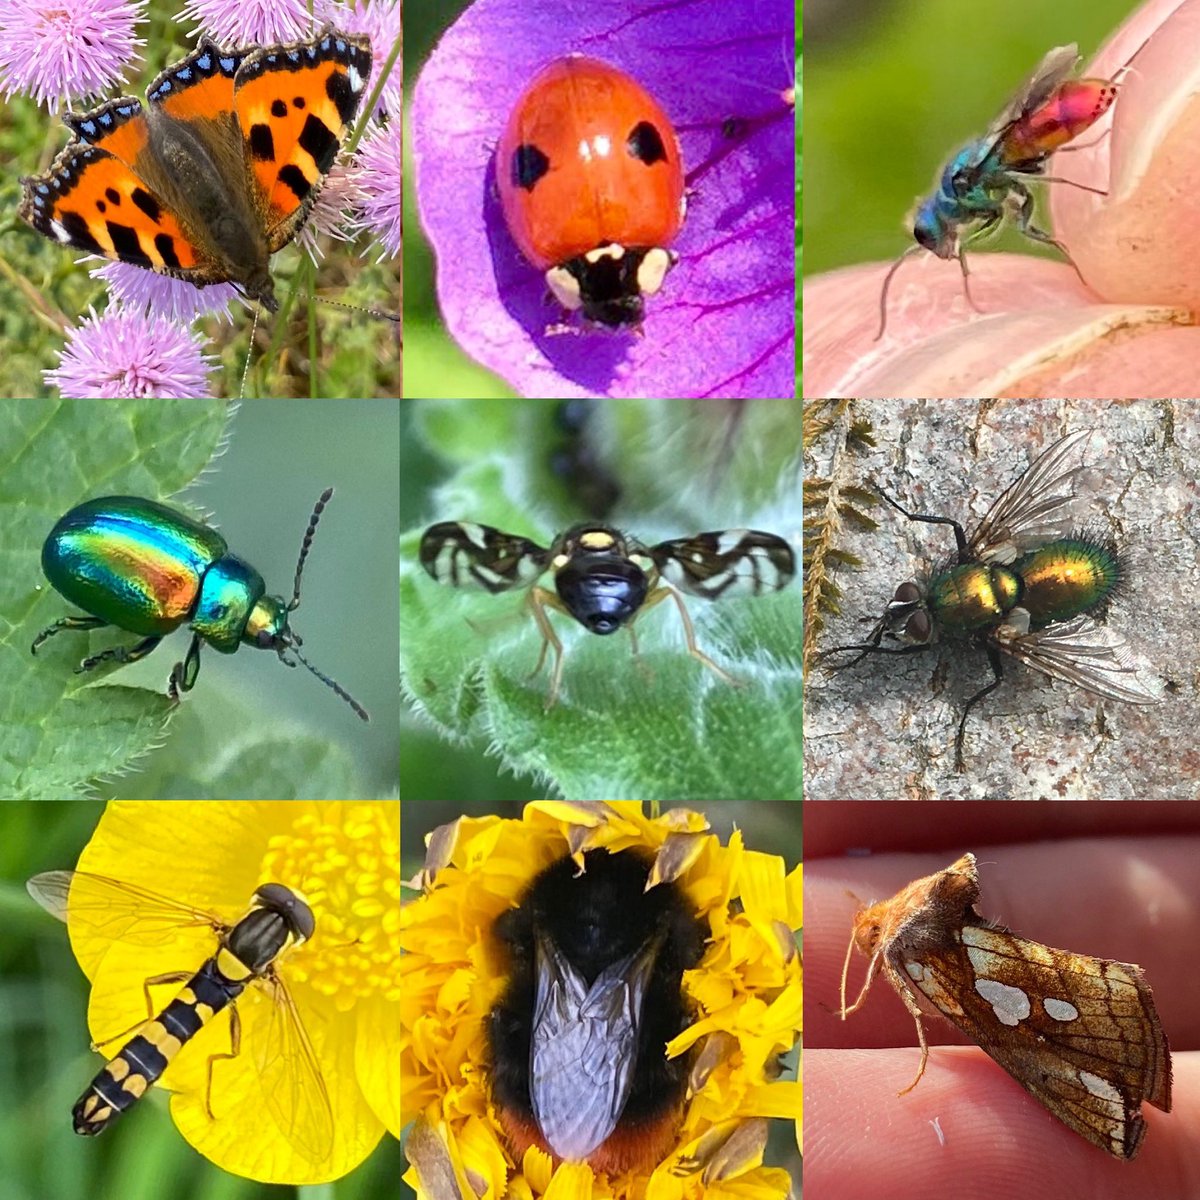 Hurrah! It’s ##insectweek 2022 (20th-26th June)! Over the next few days we’ll be sharing some of the amazing species of insects that call Yorkhill their home💚 #Glasgow #UrbanBiodiversity
🐝🐞🪰🦋🪲🪳🦗🦟🐛 
#LittleThingsThatRunTheWorld #WhatIsYourFavouriteInsect